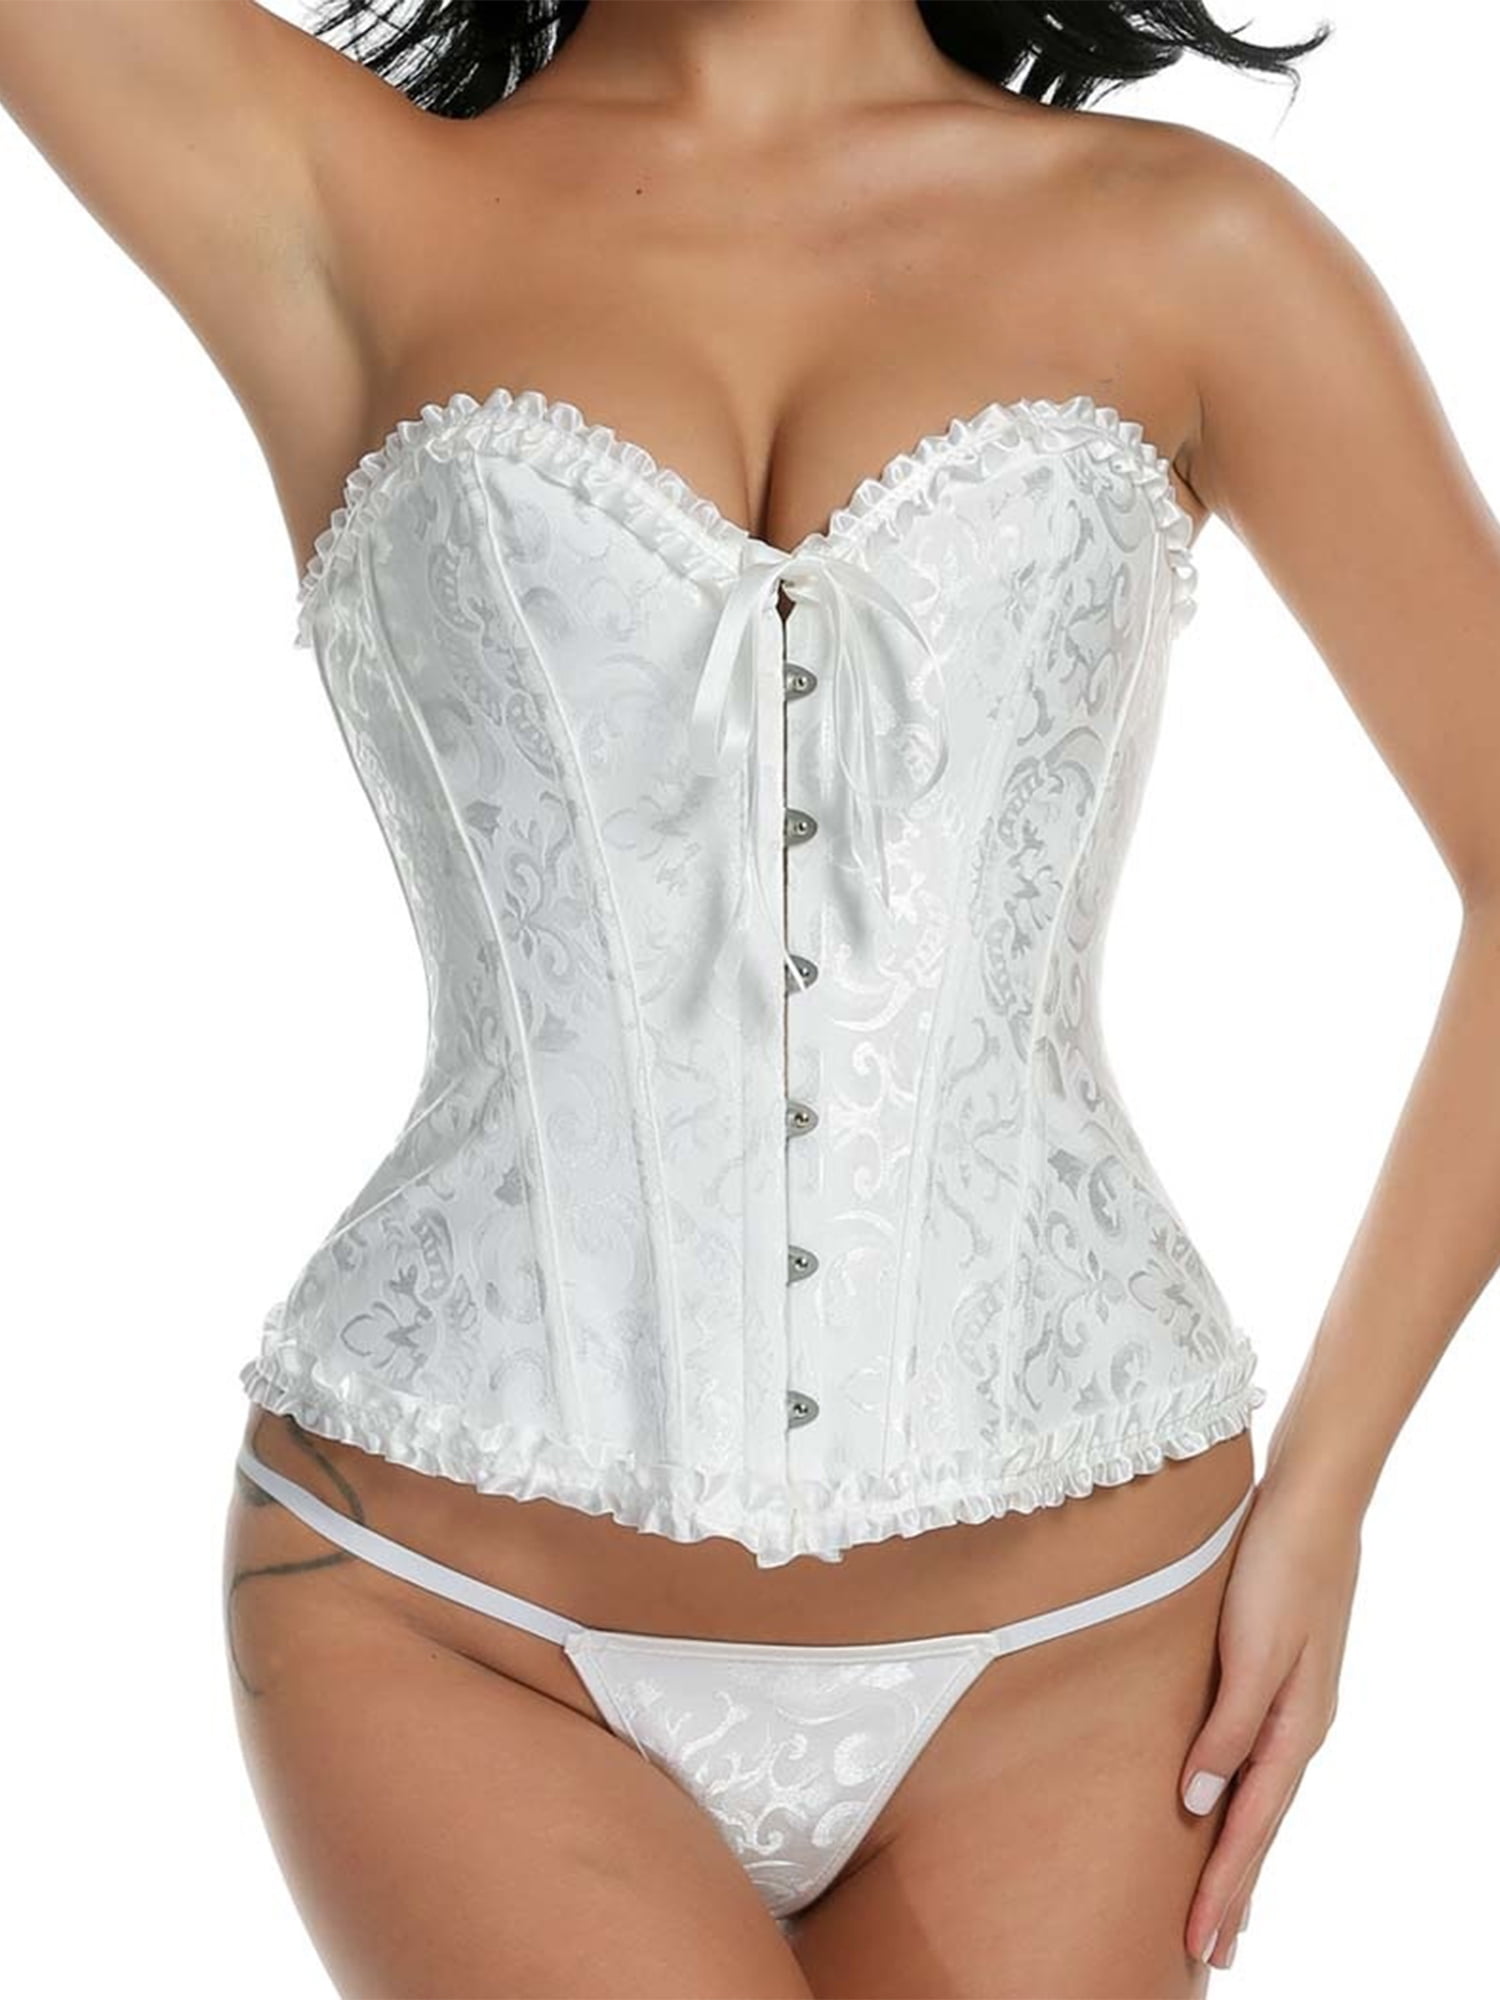 Sexy Women's Fashion Lace up Overbust Corset Plus Size Waist Training  Corsets Bustier Top Corselet with Thong,S-6XL